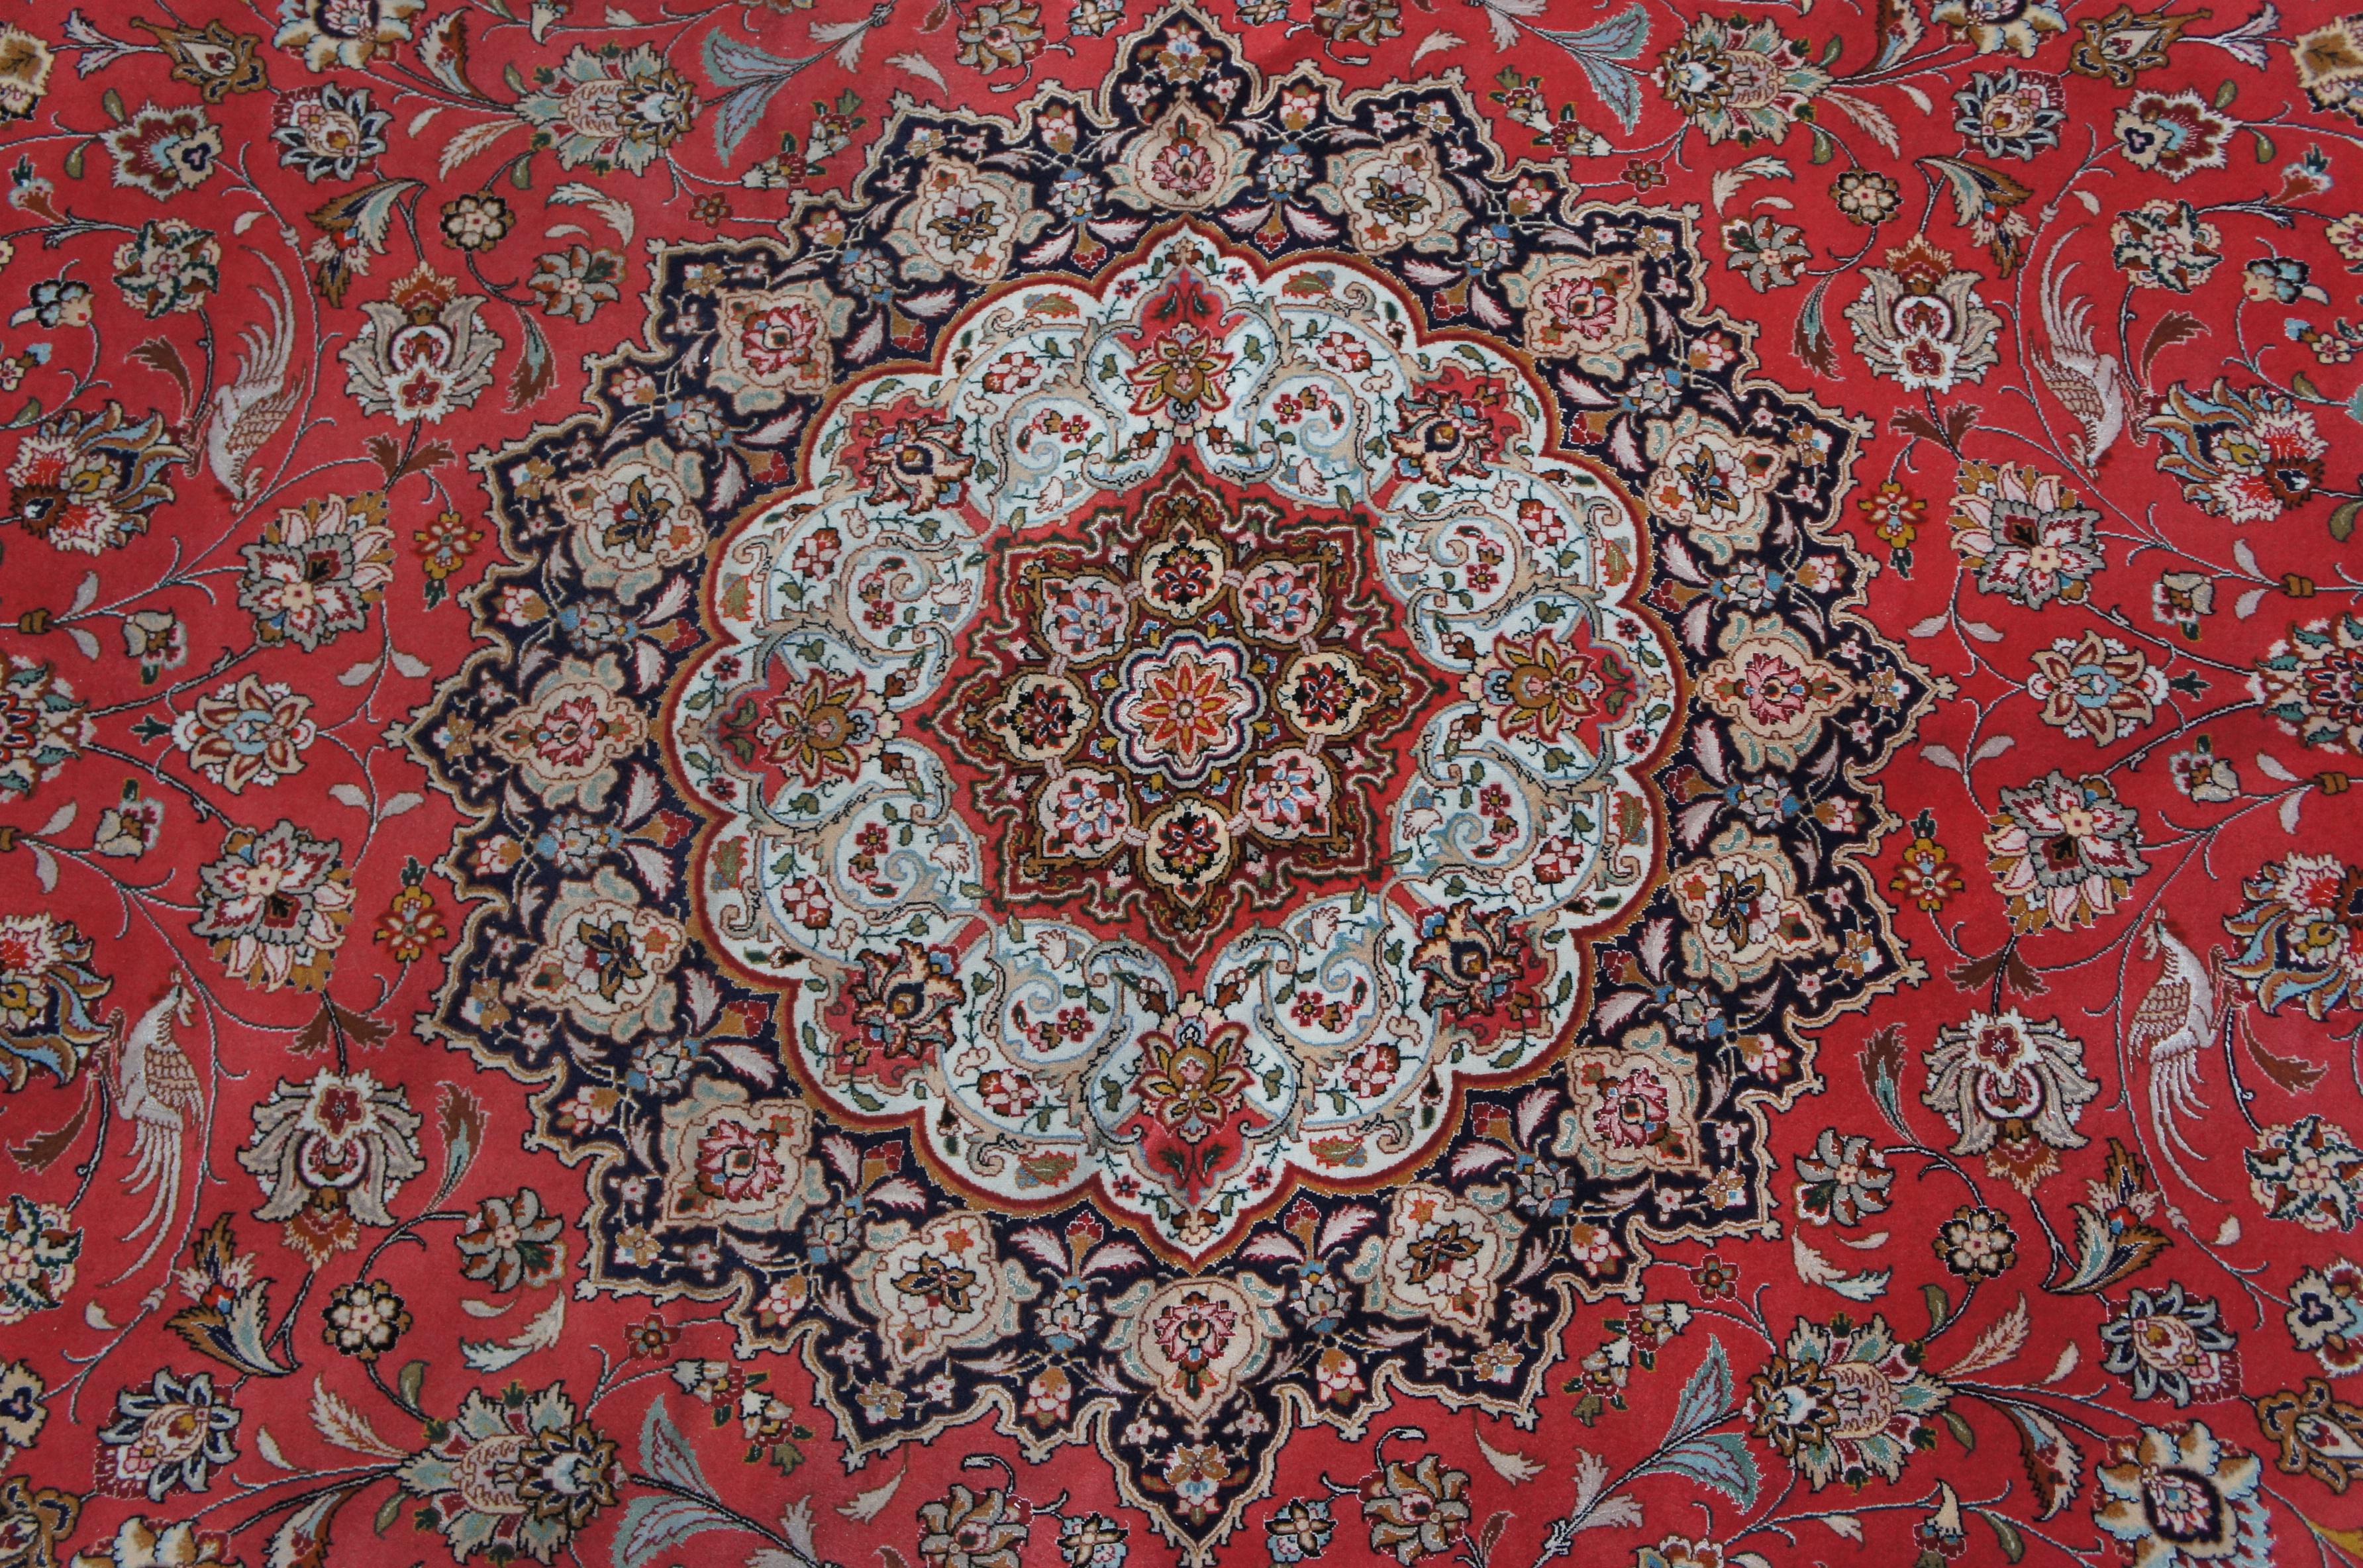 Vintage Silk Wool Floral All Over Persian Tabriz Area Rug Carpet Birds 10' x 13' In Good Condition For Sale In Dayton, OH